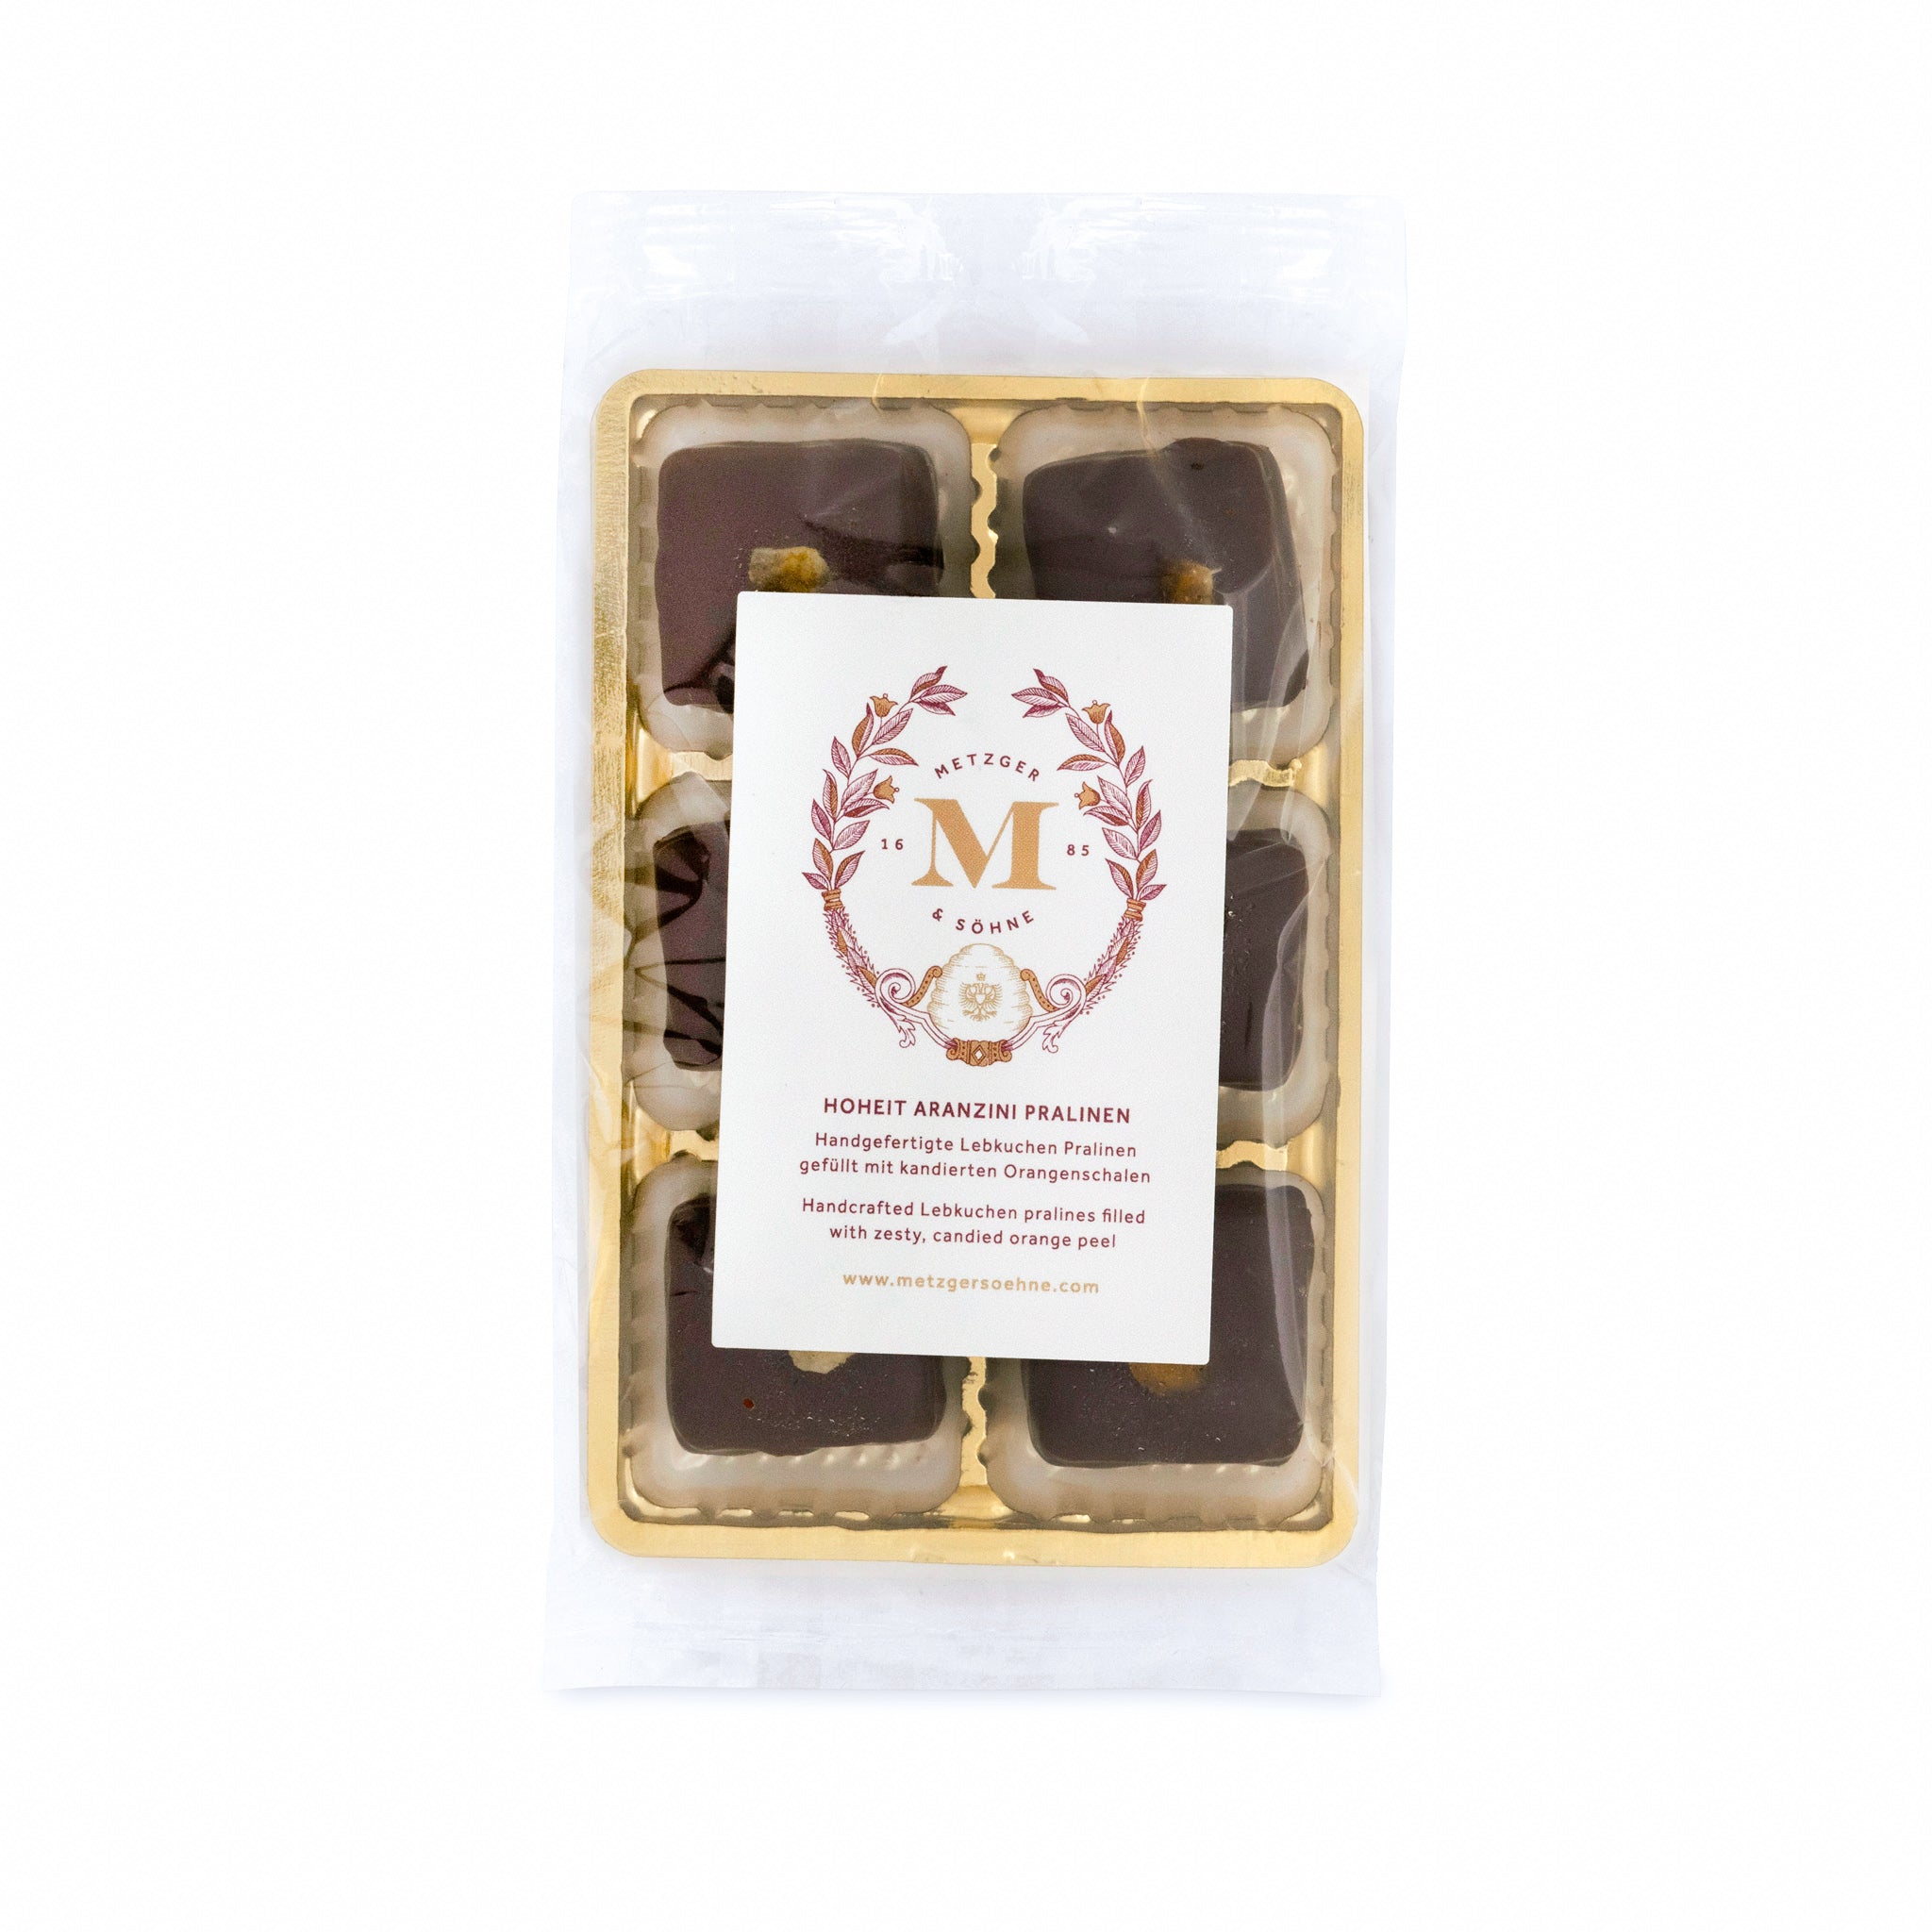 6 handcrafted Lebkuchen 'honey cake' pralines, filled with candied orange peel, and coated in rich, dark chocolate. The perfect treat for those who appreciate the romance of chocolate and orange.